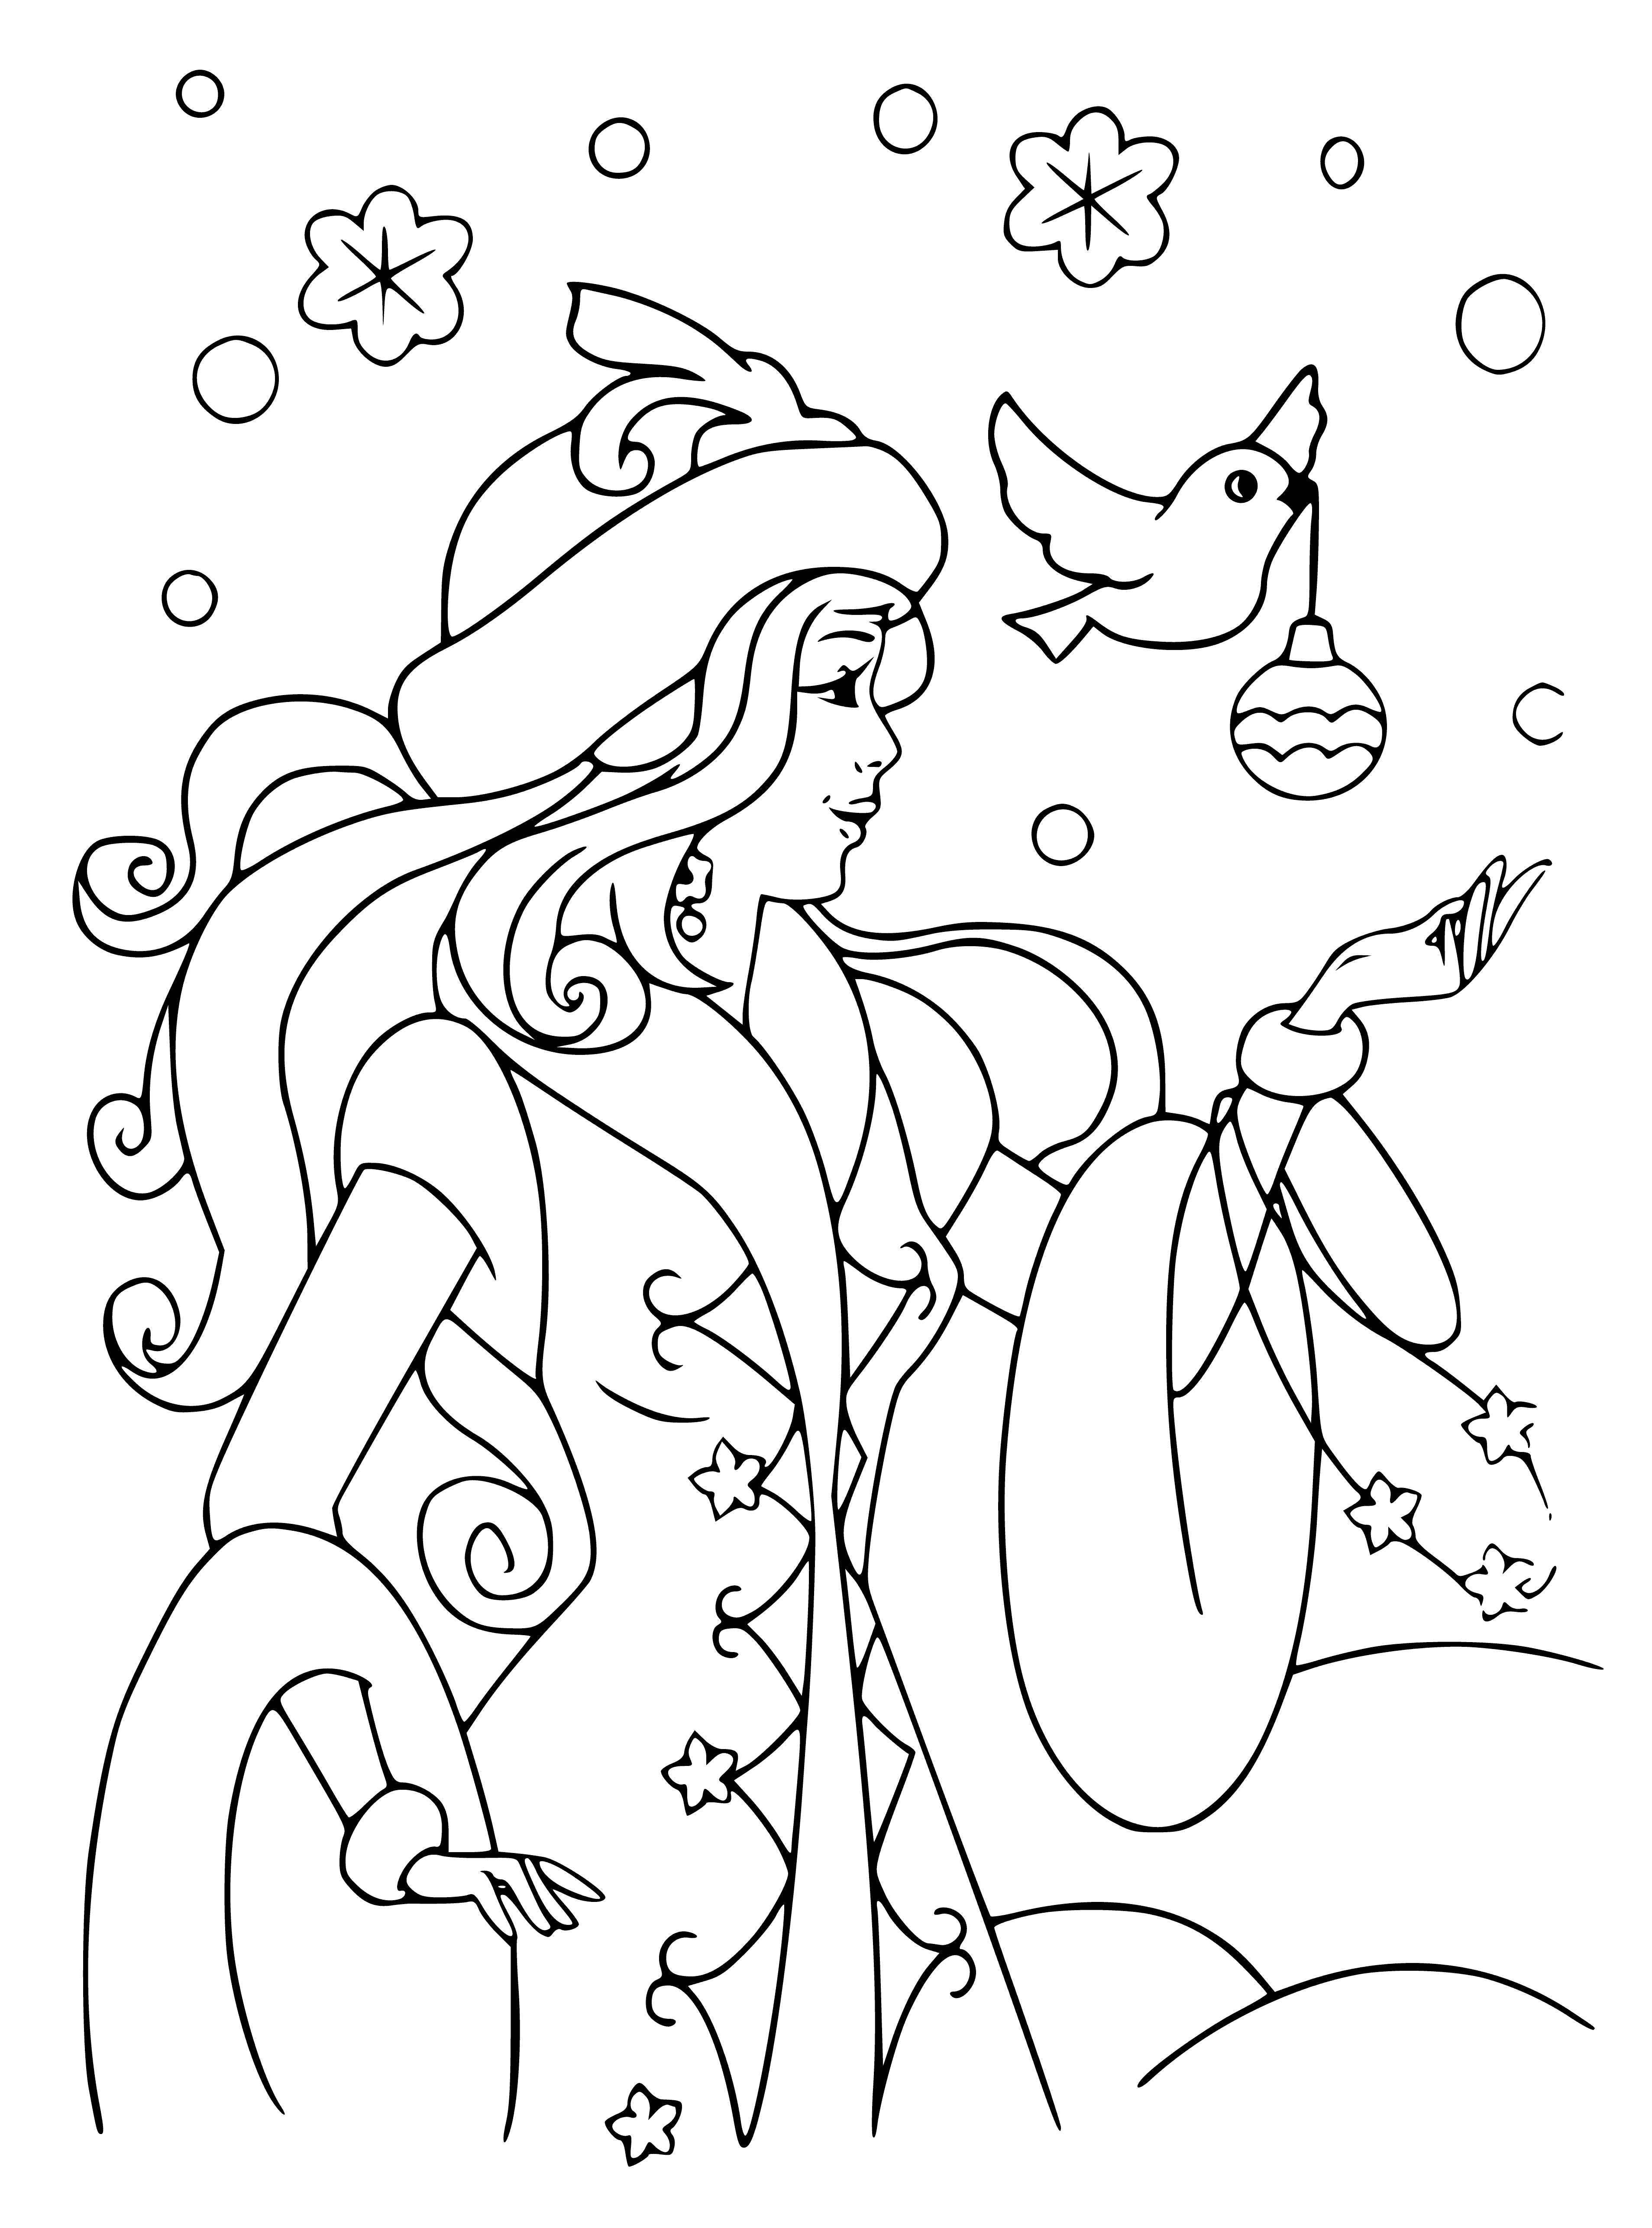 coloring page: Beautiful maiden of snow with delicate face & icy blue eyes. Wearing dress of pure white, a wreath of snowflowers in her hair with serene expression. Knows a great secret.